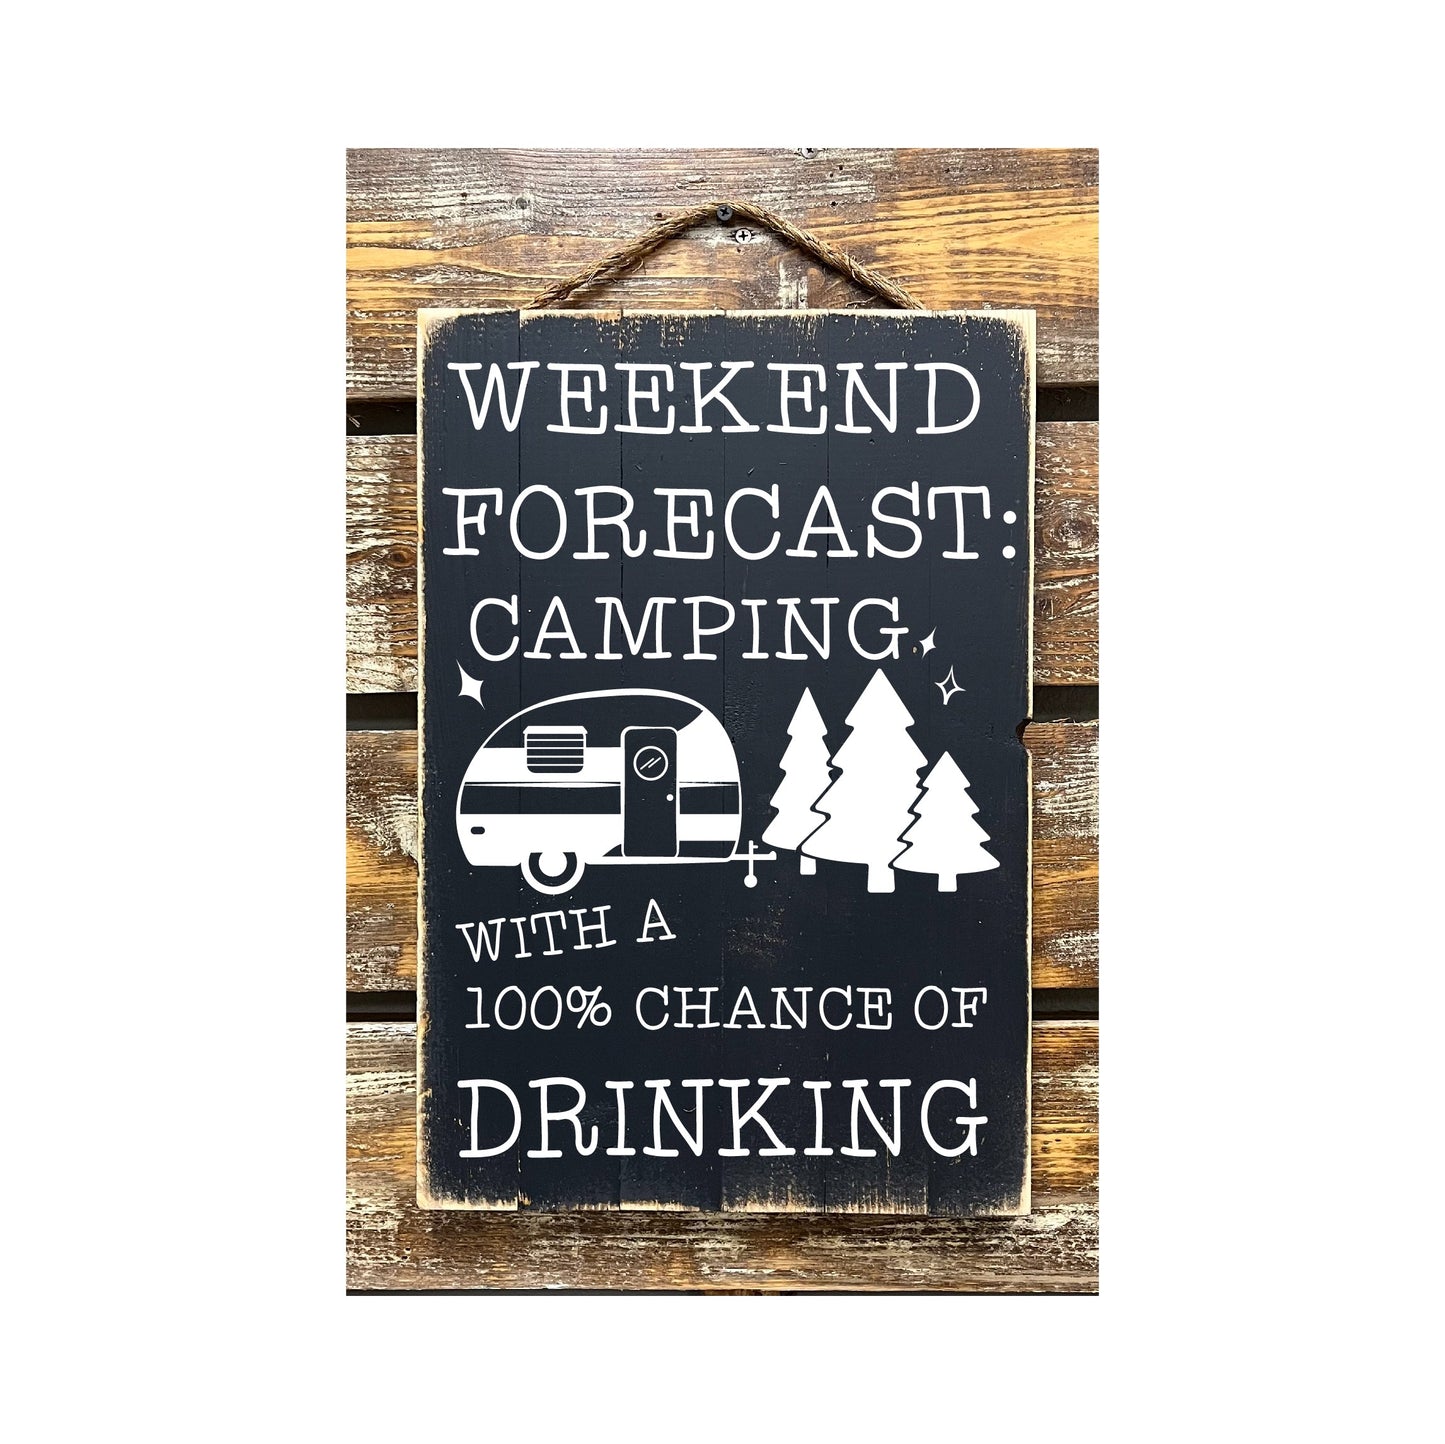 Weekend Forecast Camping With 100% Chance Of Drinking